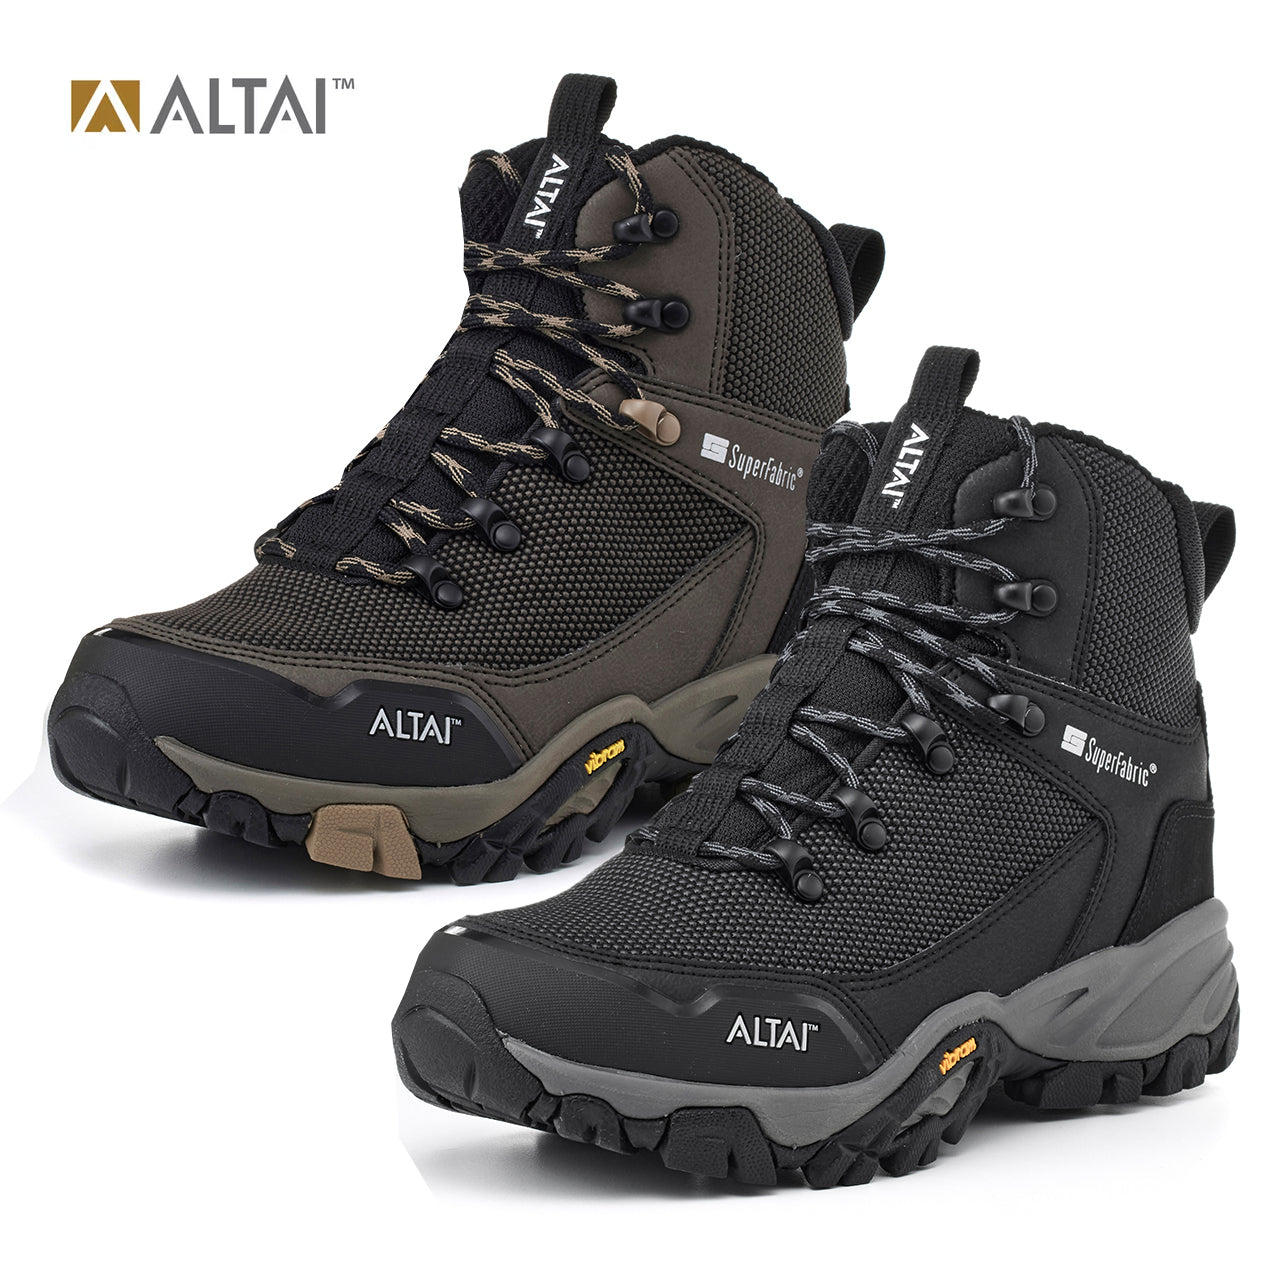 Altai - Booster Zipped Hiking Trekking Shoes